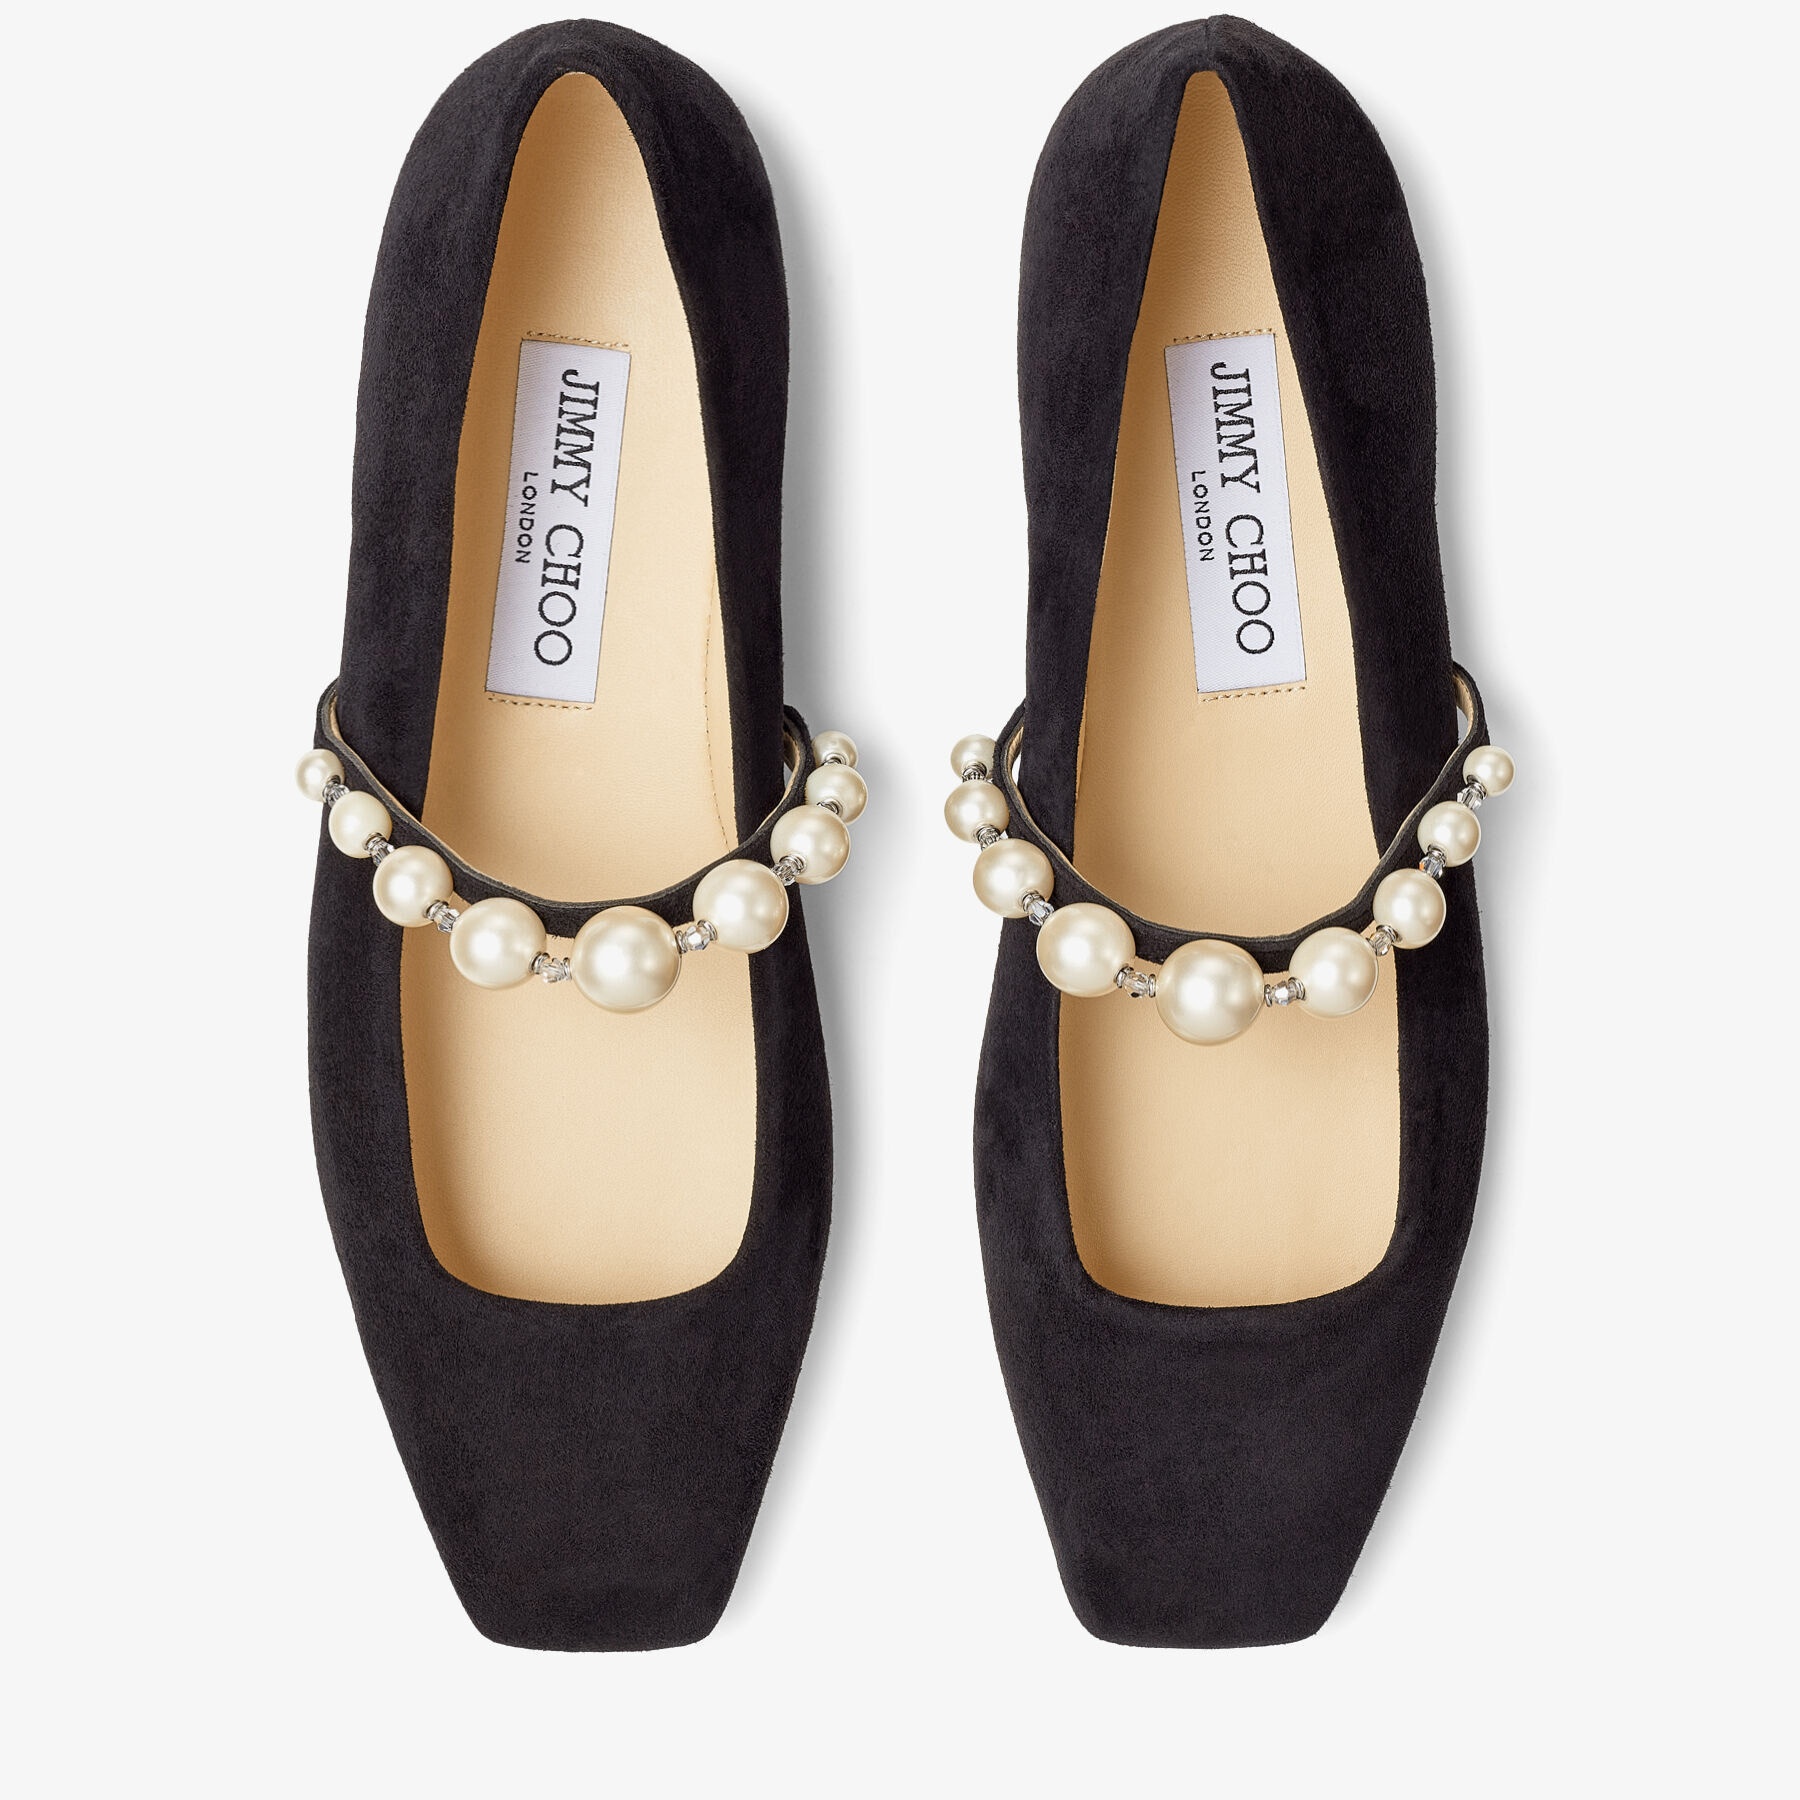 Ade Flat
Black Suede Flats with Pearl Embellishment - 5